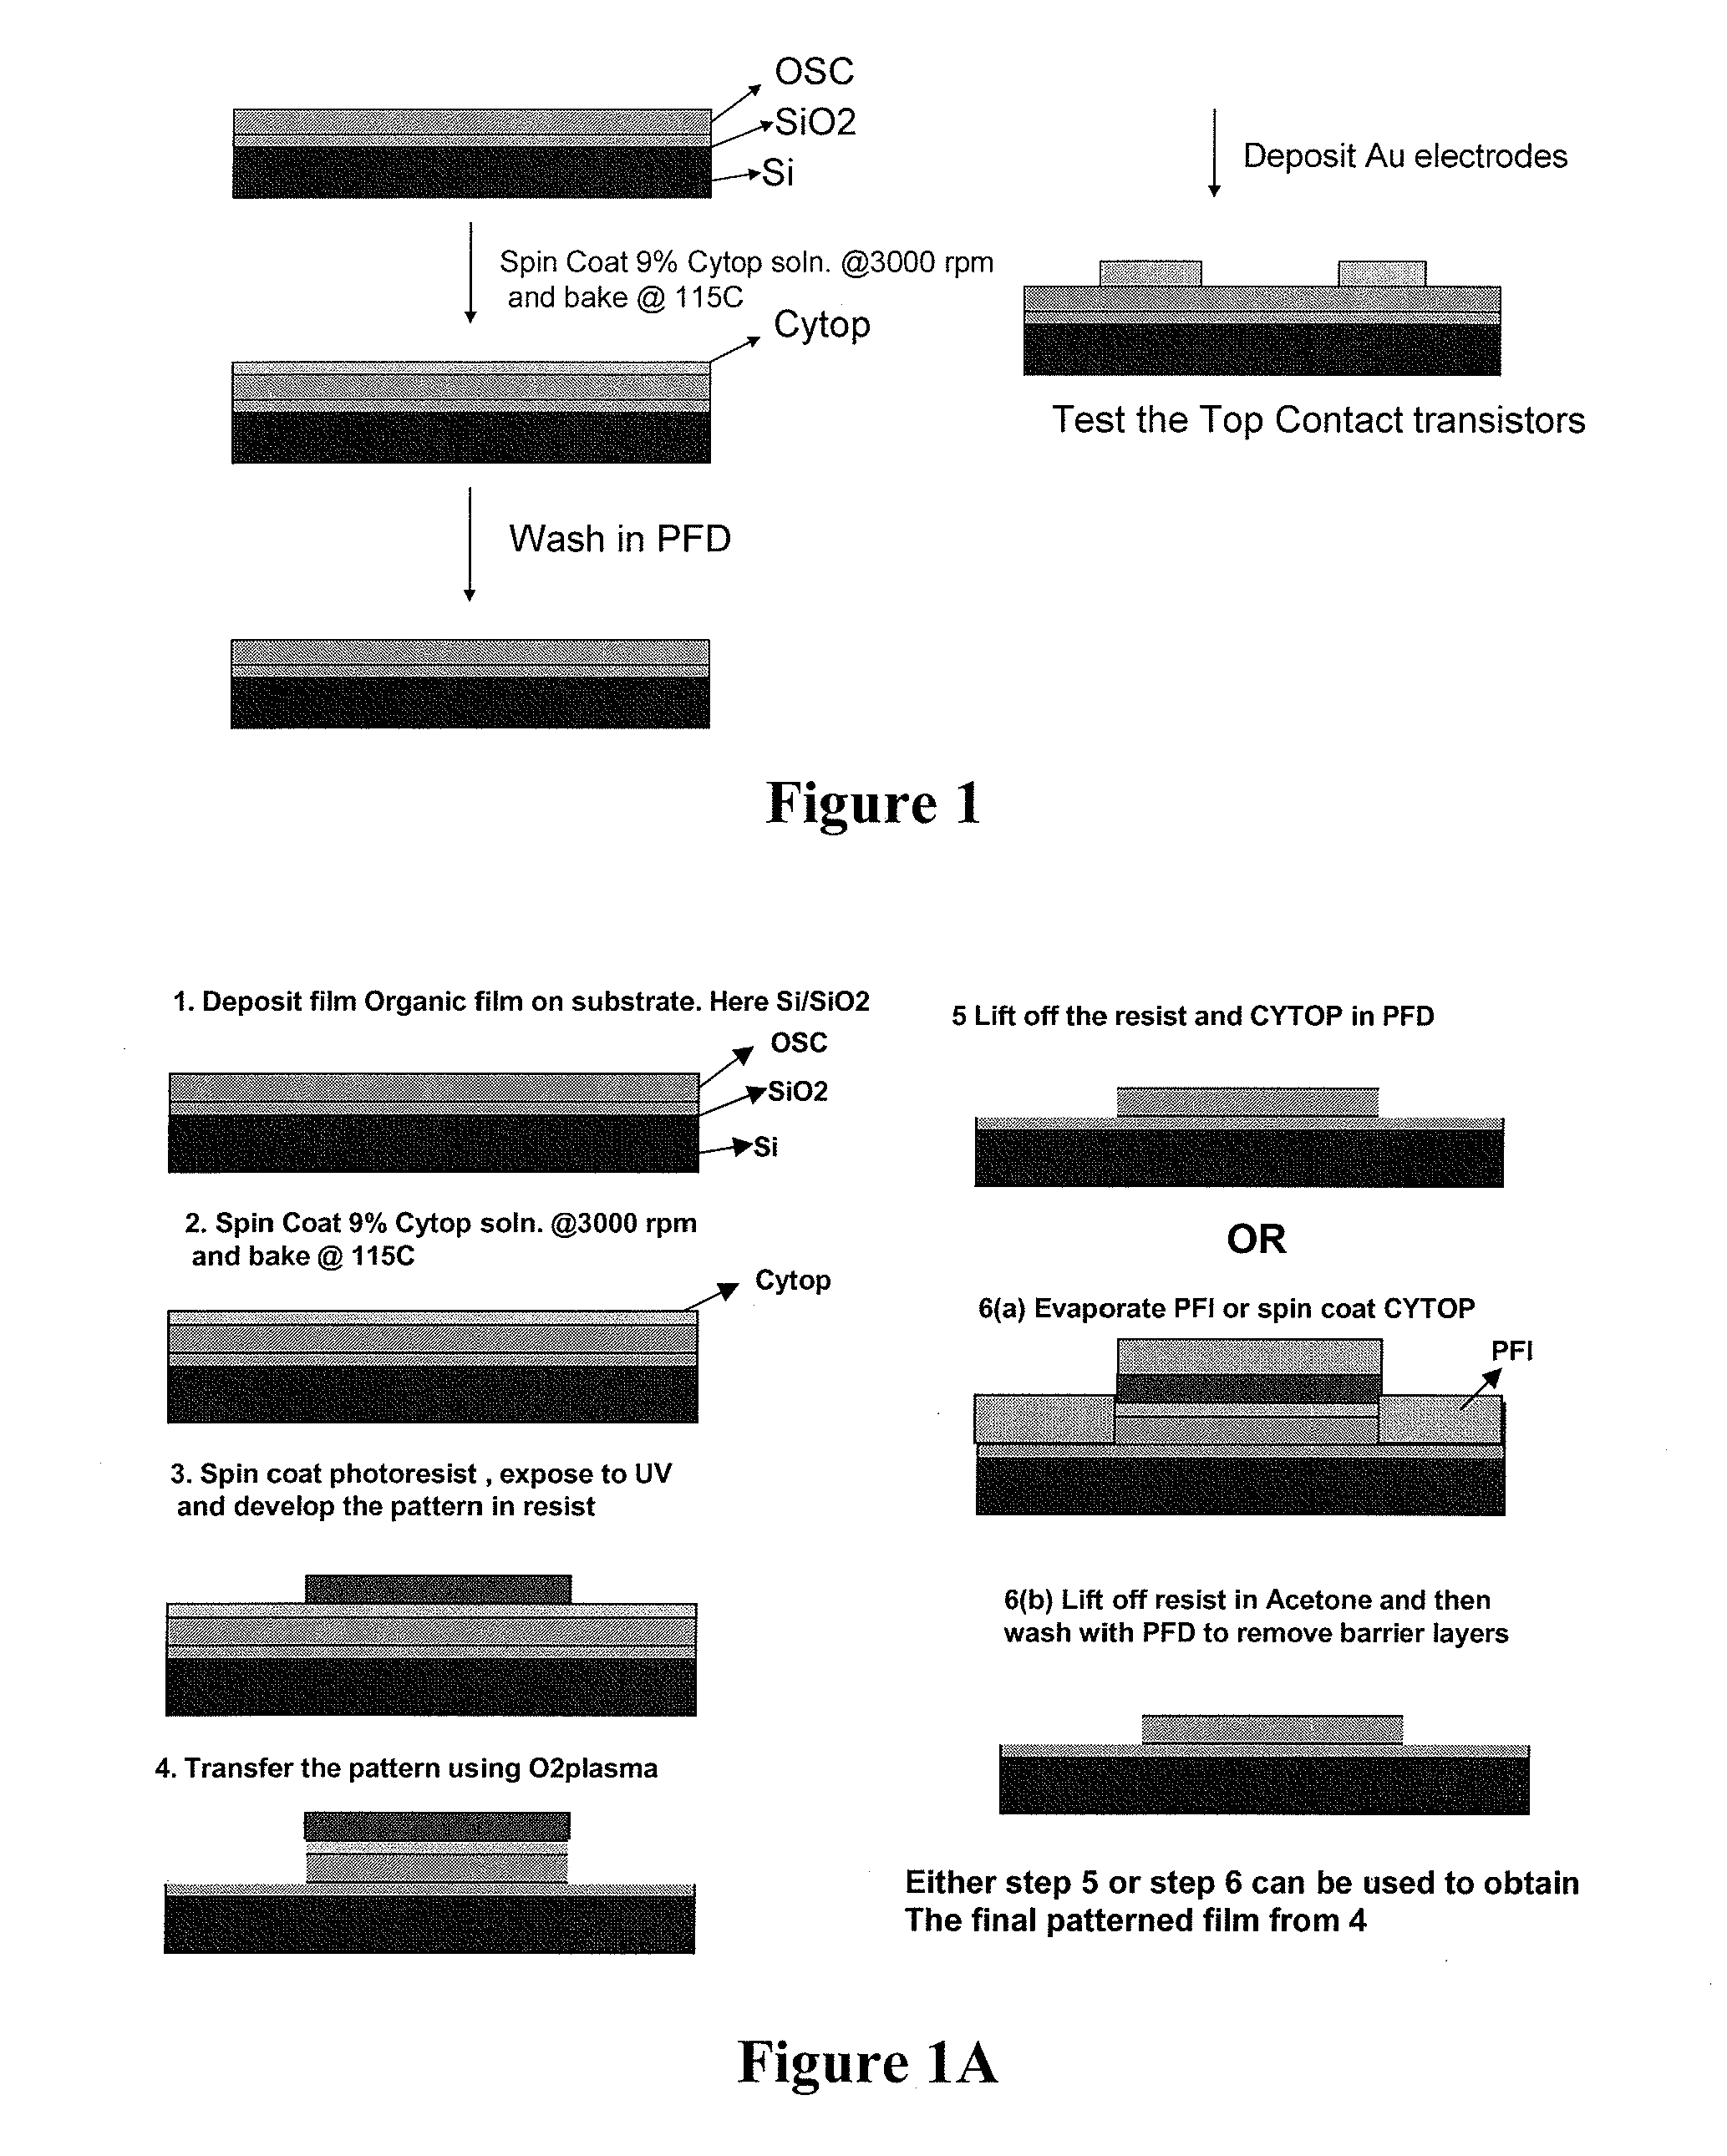 Patterning devices using fluorinated compounds